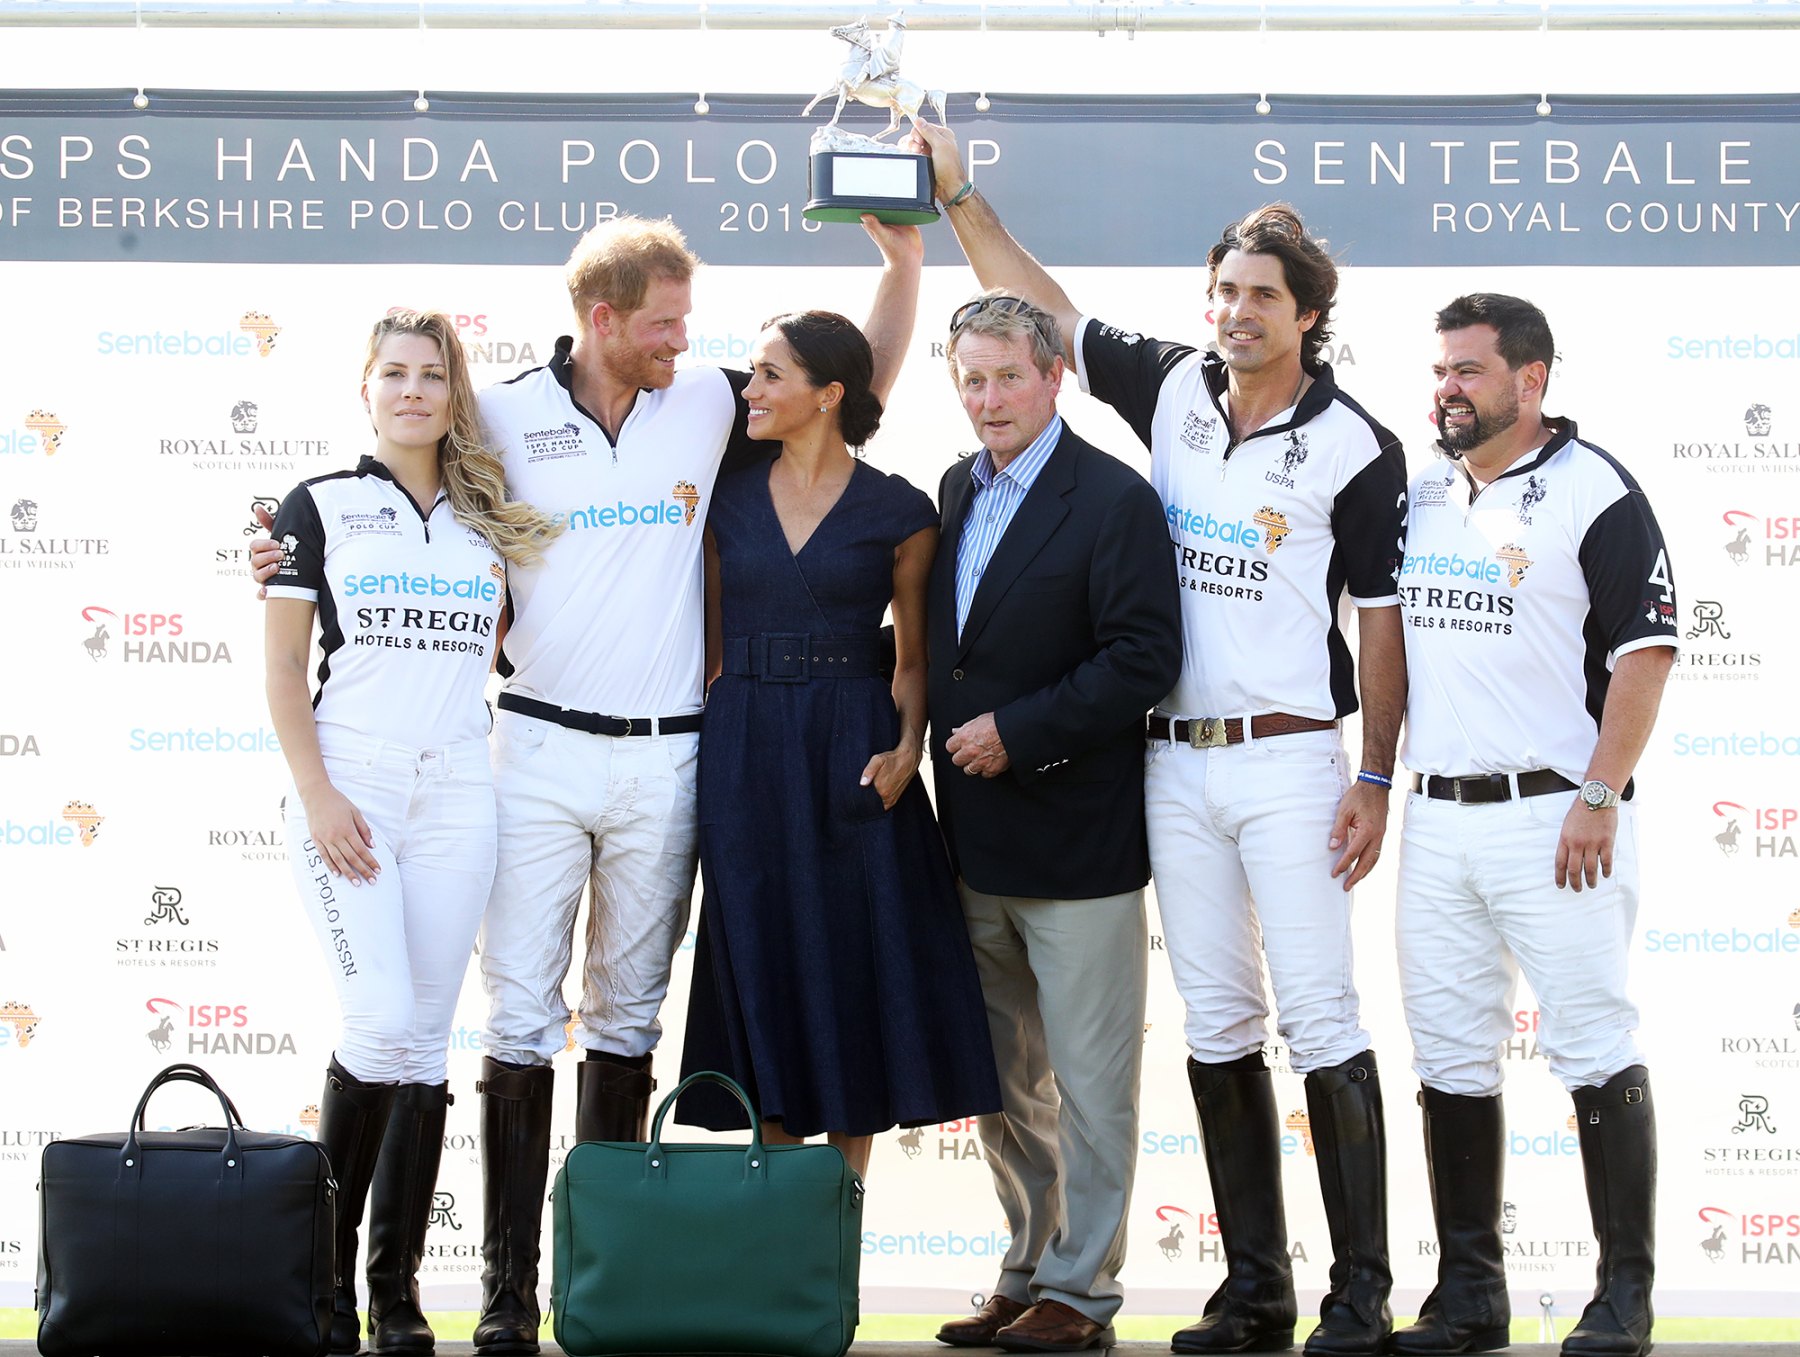 Prince Harry, Duchess Meghan Kiss After His Polo Match Win: Pics